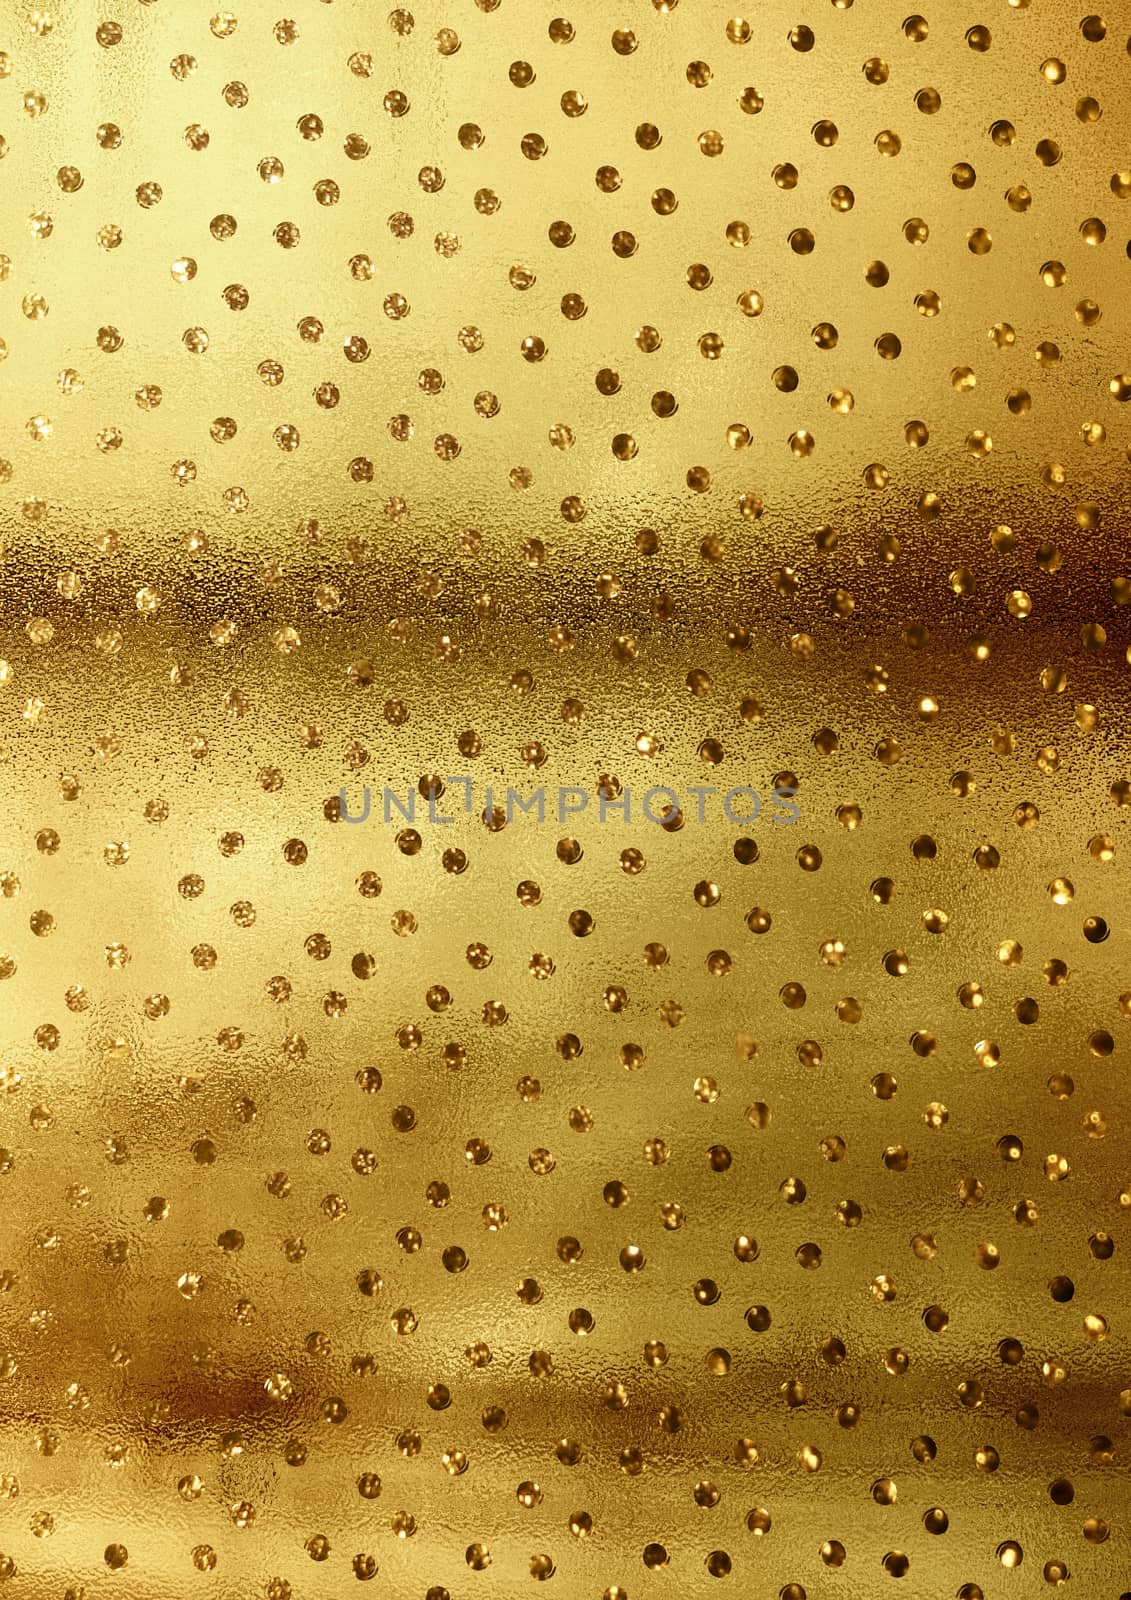 The vertical Crumped golden paper background with glitter pattern